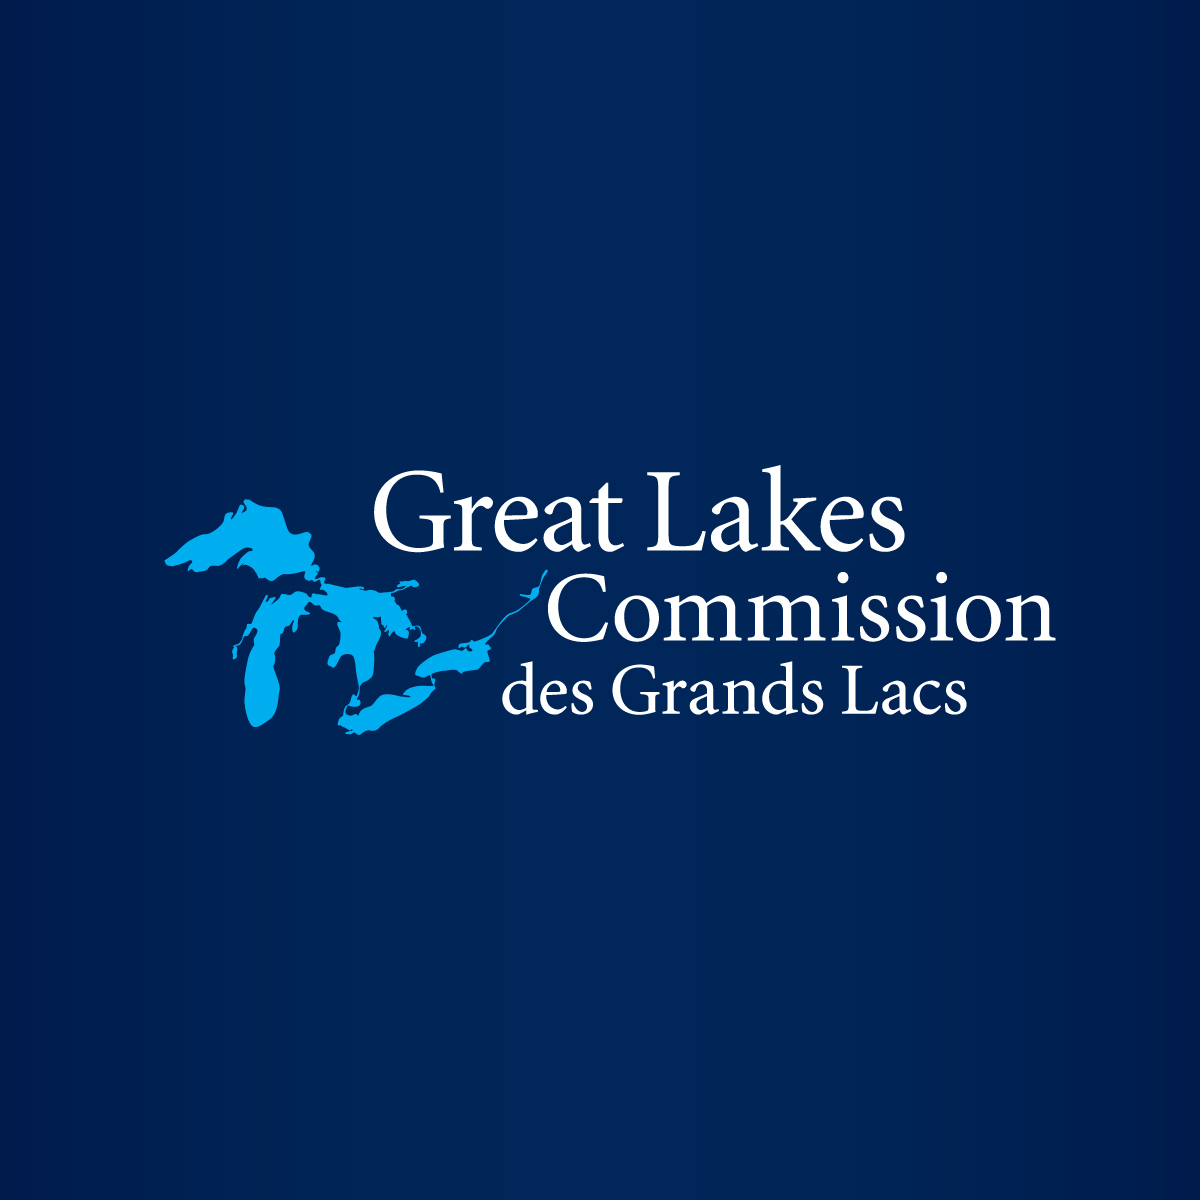 tribes lead effort to restore enhance native great lakes fish populations